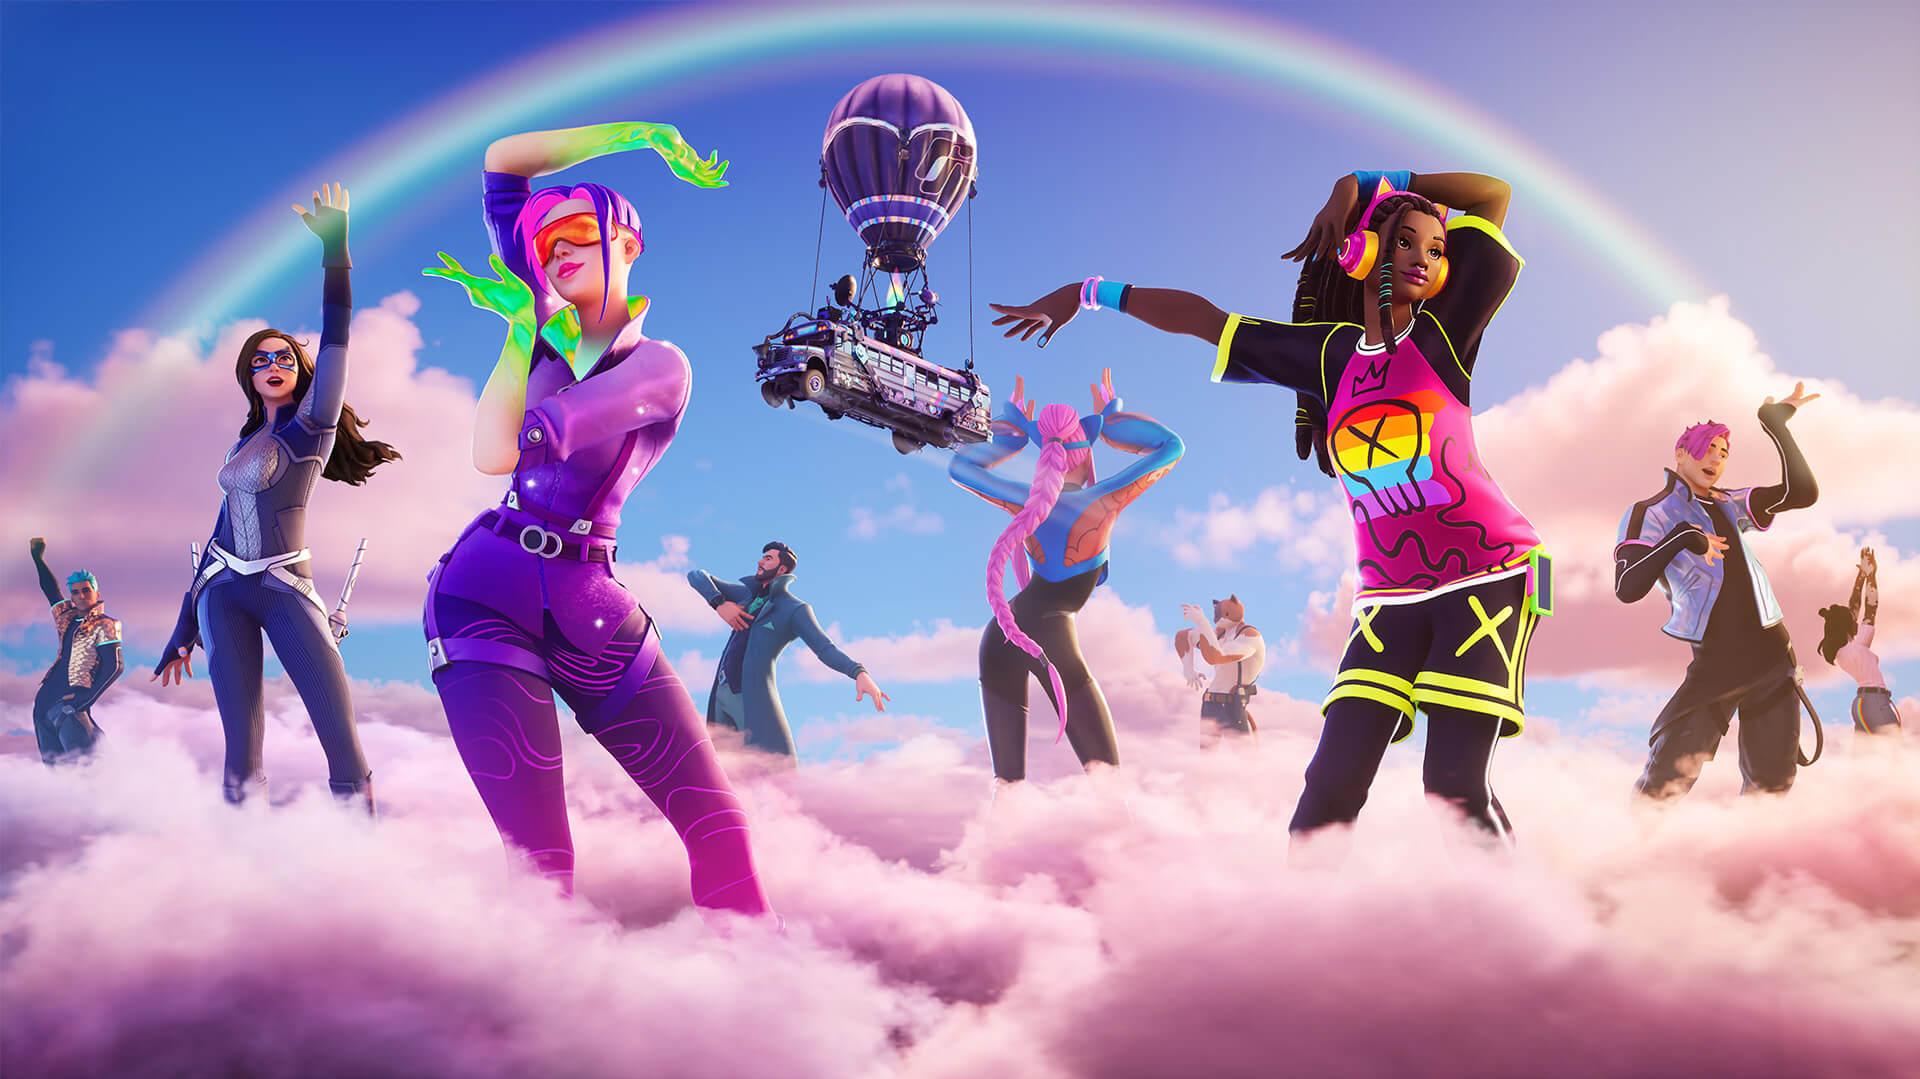 Show Your Pride With Epic Games In Rainbow Royale